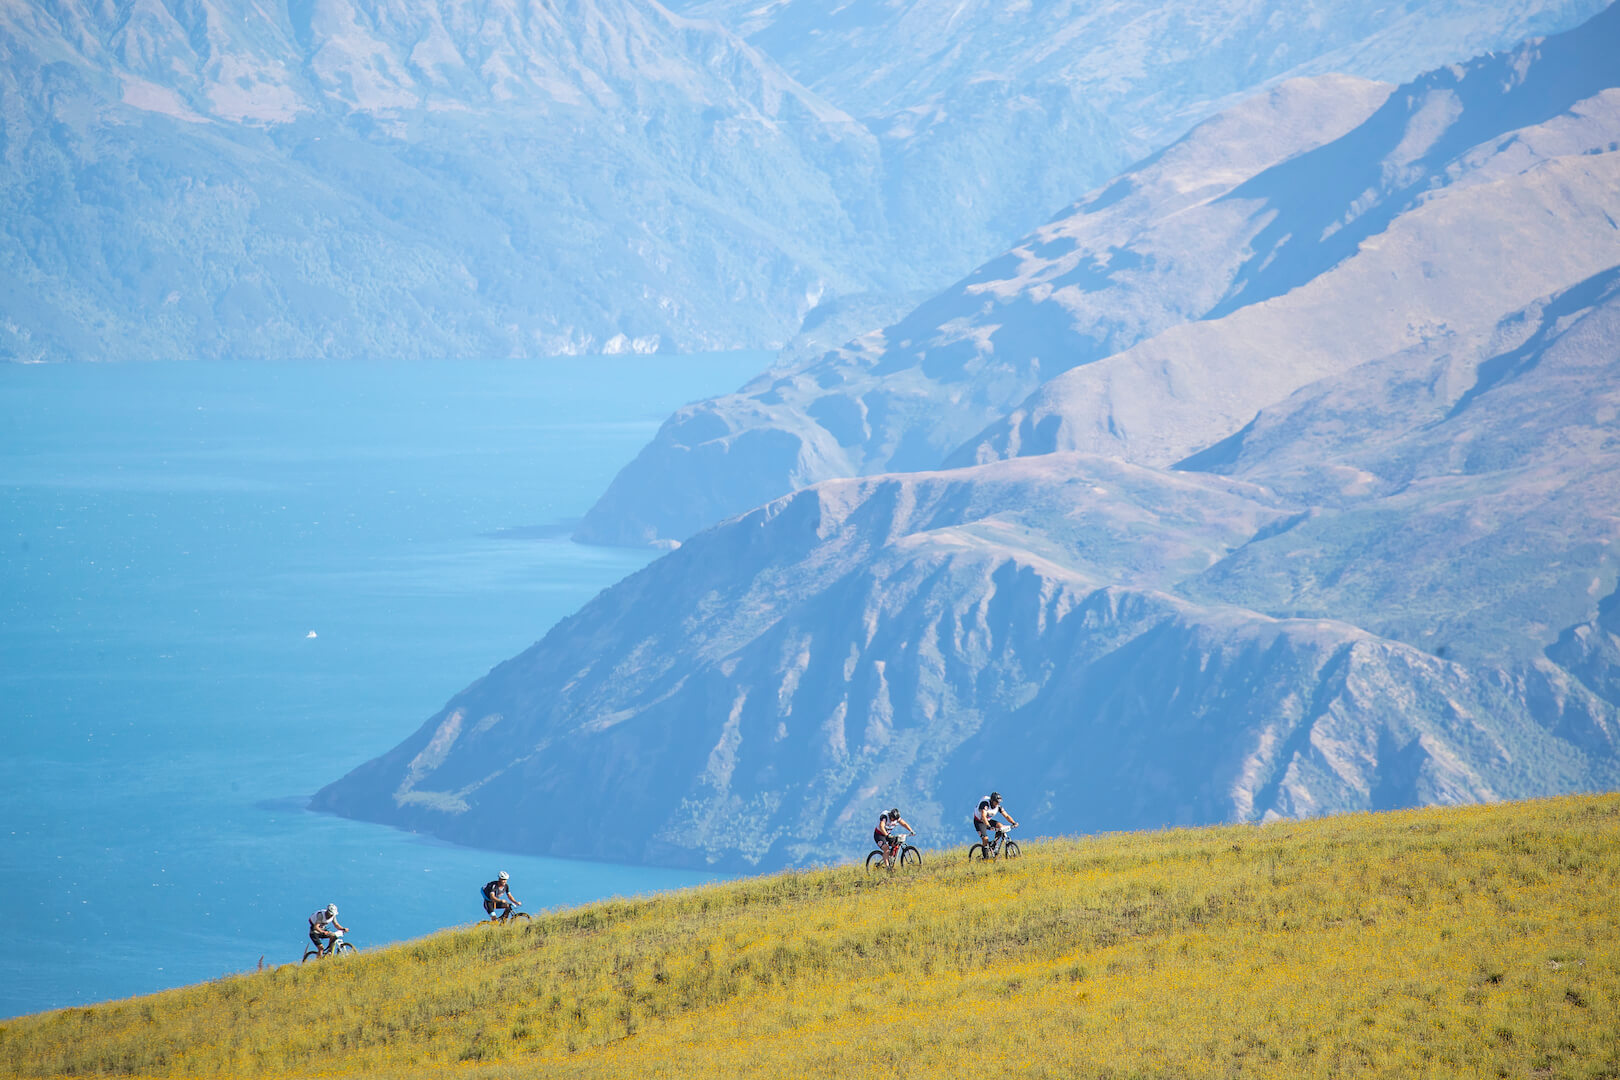 RED BULL DEFIANCE RETURNS TO WANAKA IN MARCH 2020